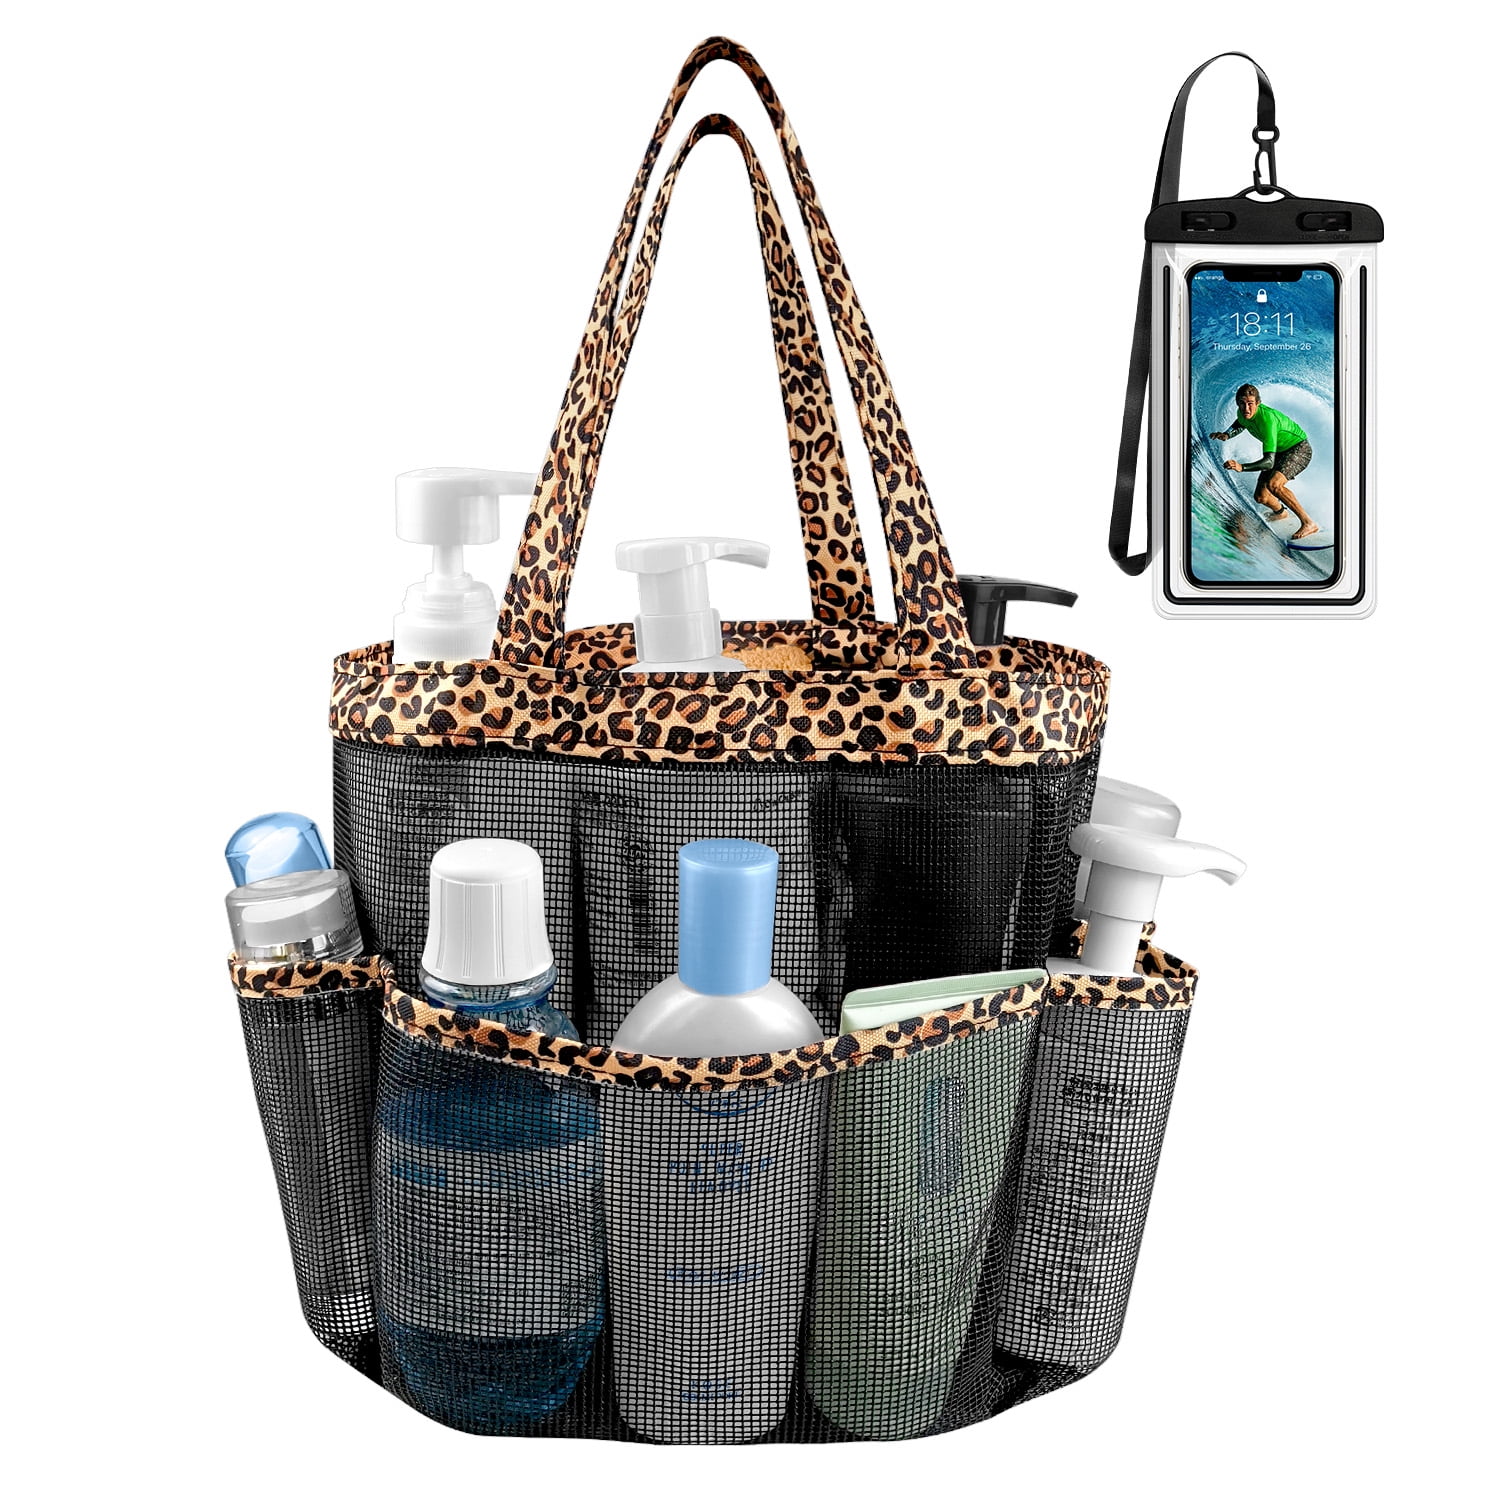 Happy Date Shower Caddy Basket, Portable Shower Tote, Dorm College